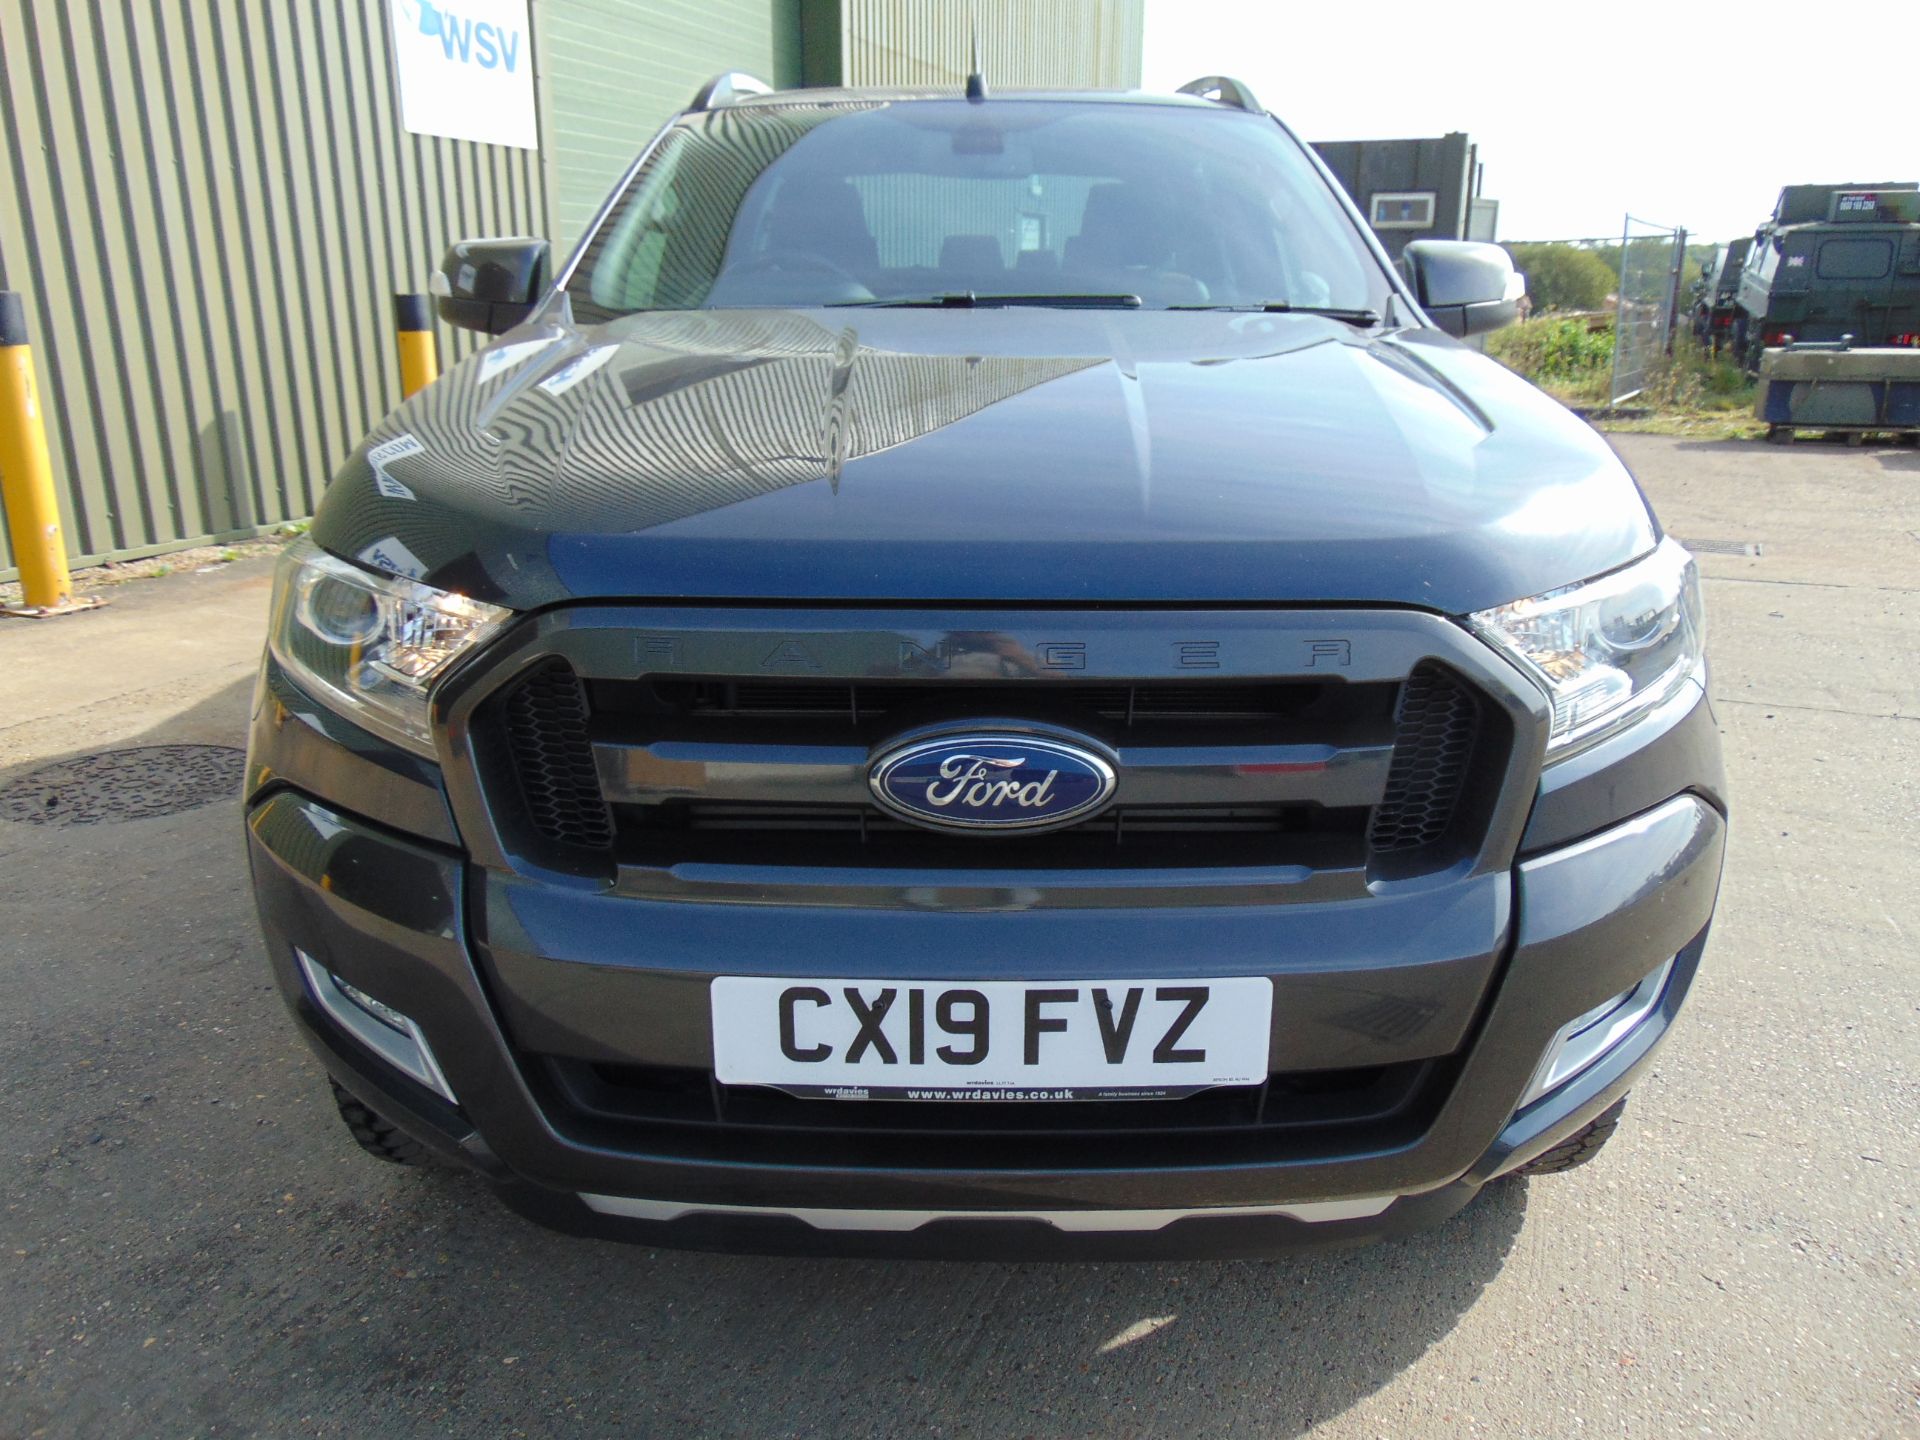 2019 Ford Ranger Wildtrak Double Cab 4x4 3.2 6 Speed Auto ONLY 45,667 Miles Warranted - Image 3 of 45